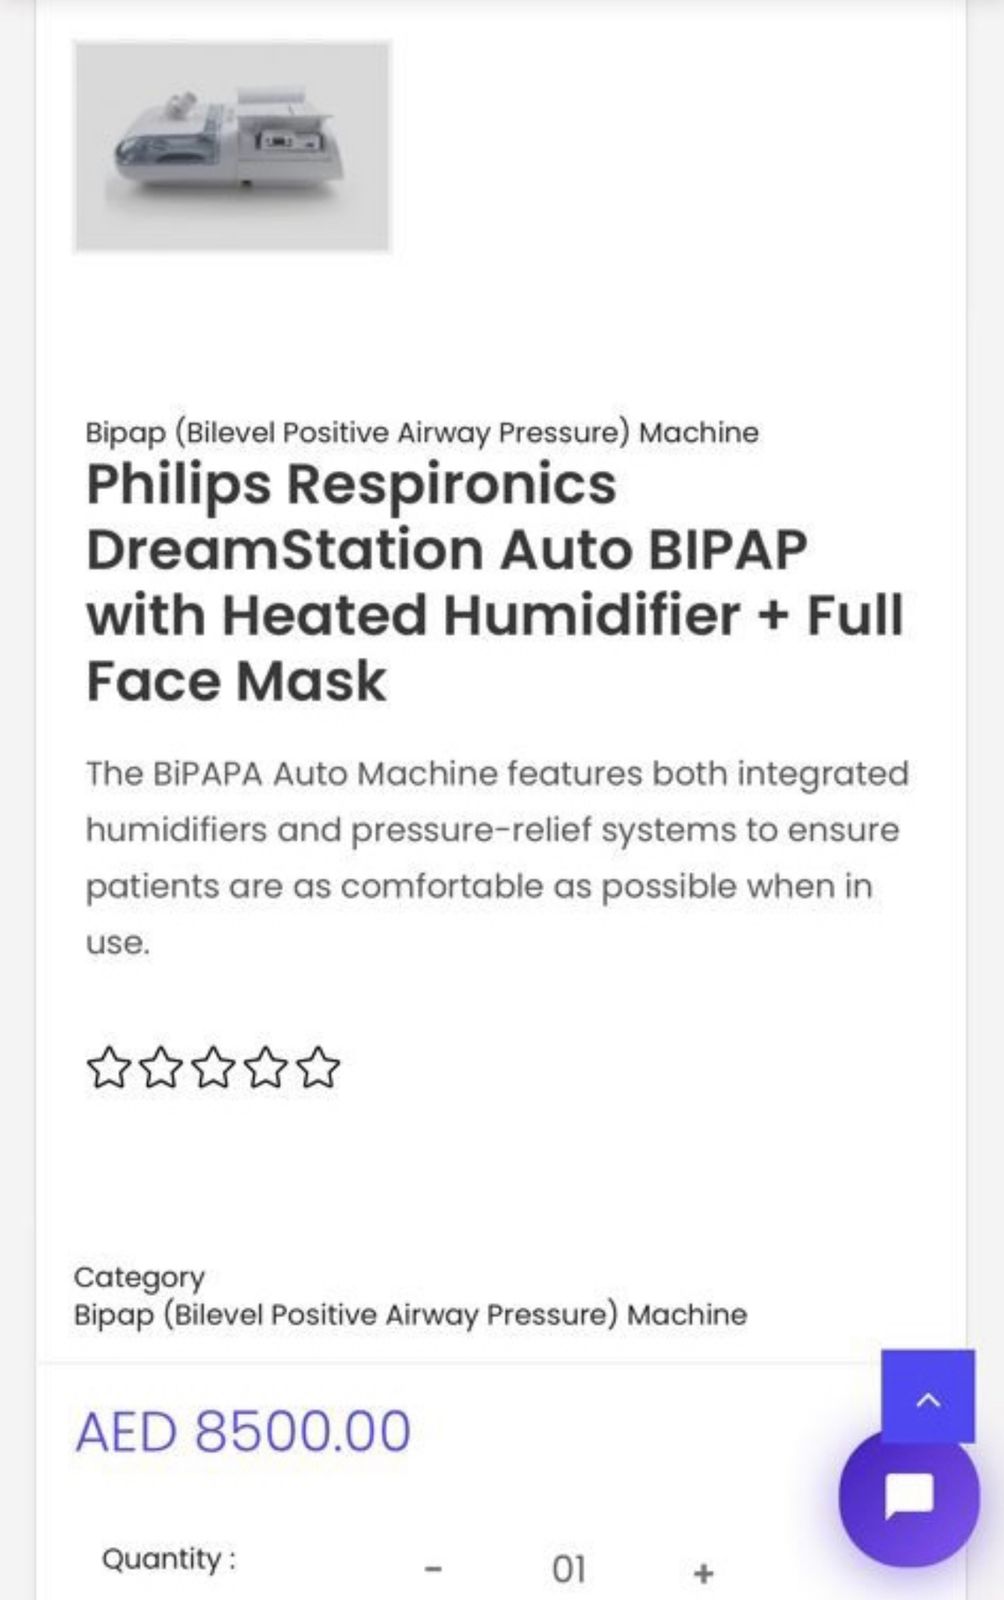 Philips Respironics DreamStation Auto BIPAP with Heated Humidifier + Full Face Mask